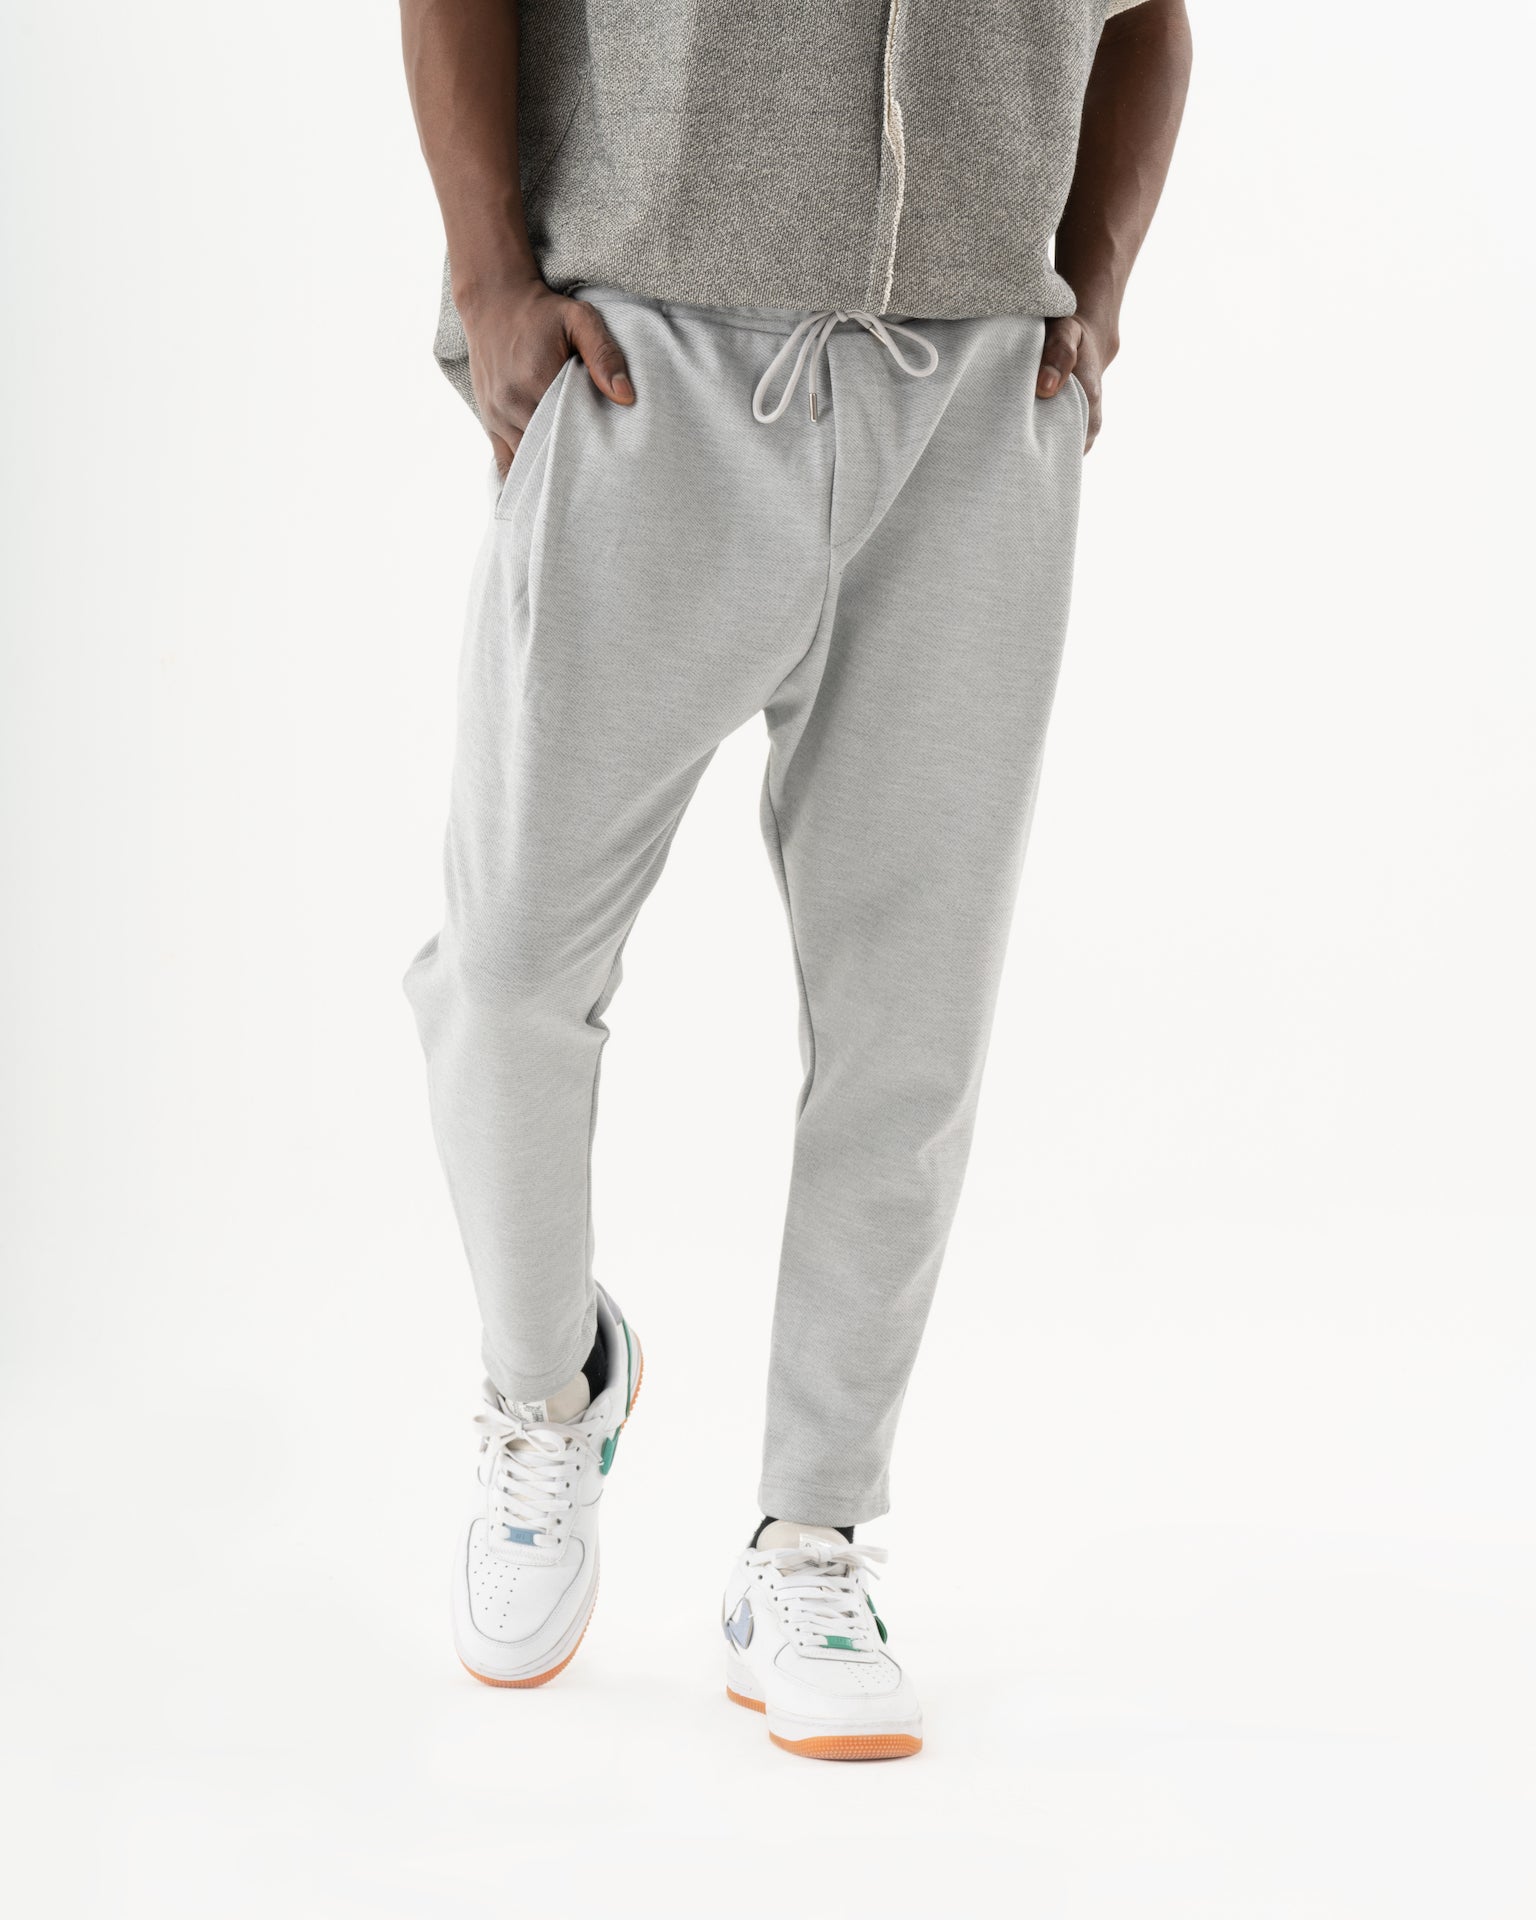 A man in a comfortable fit grey sweatshirt and SERENE JOGGERS.